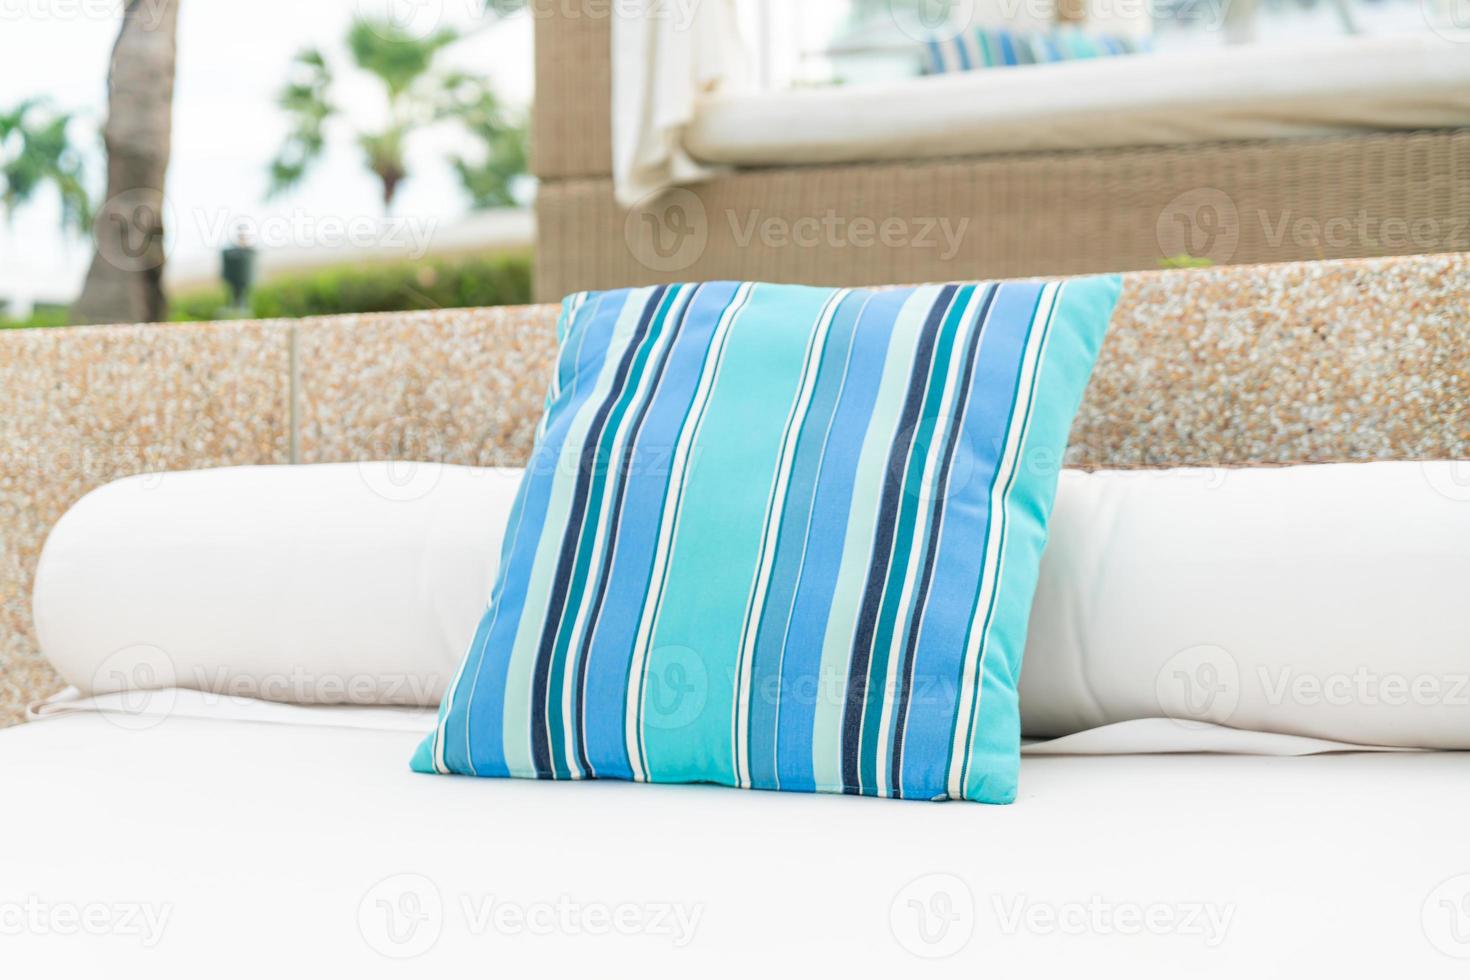 Comfortable pillow on pavilion near beach - travel and vacation concept photo